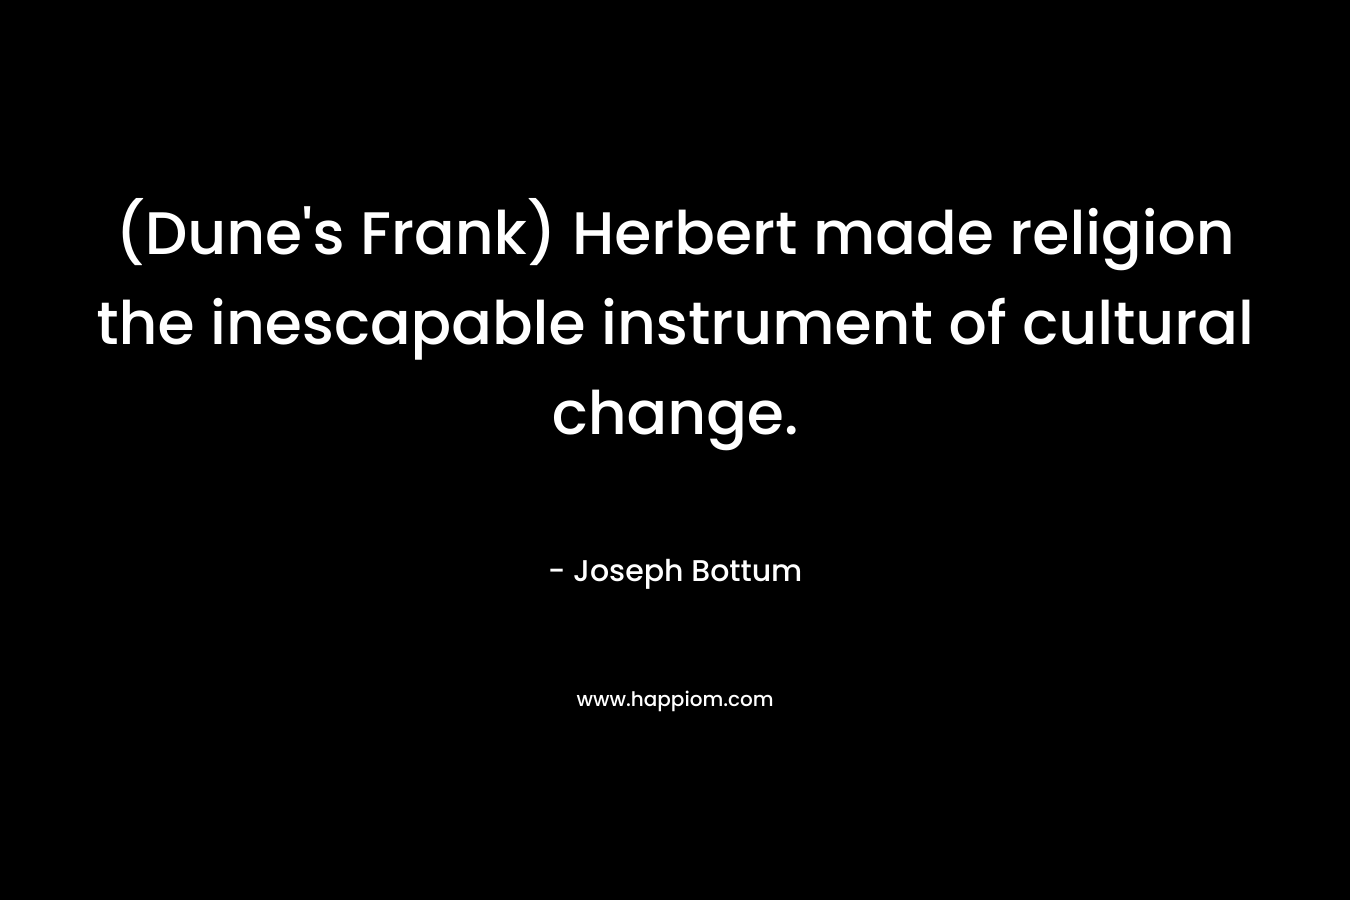 (Dune's Frank) Herbert made religion the inescapable instrument of cultural change.